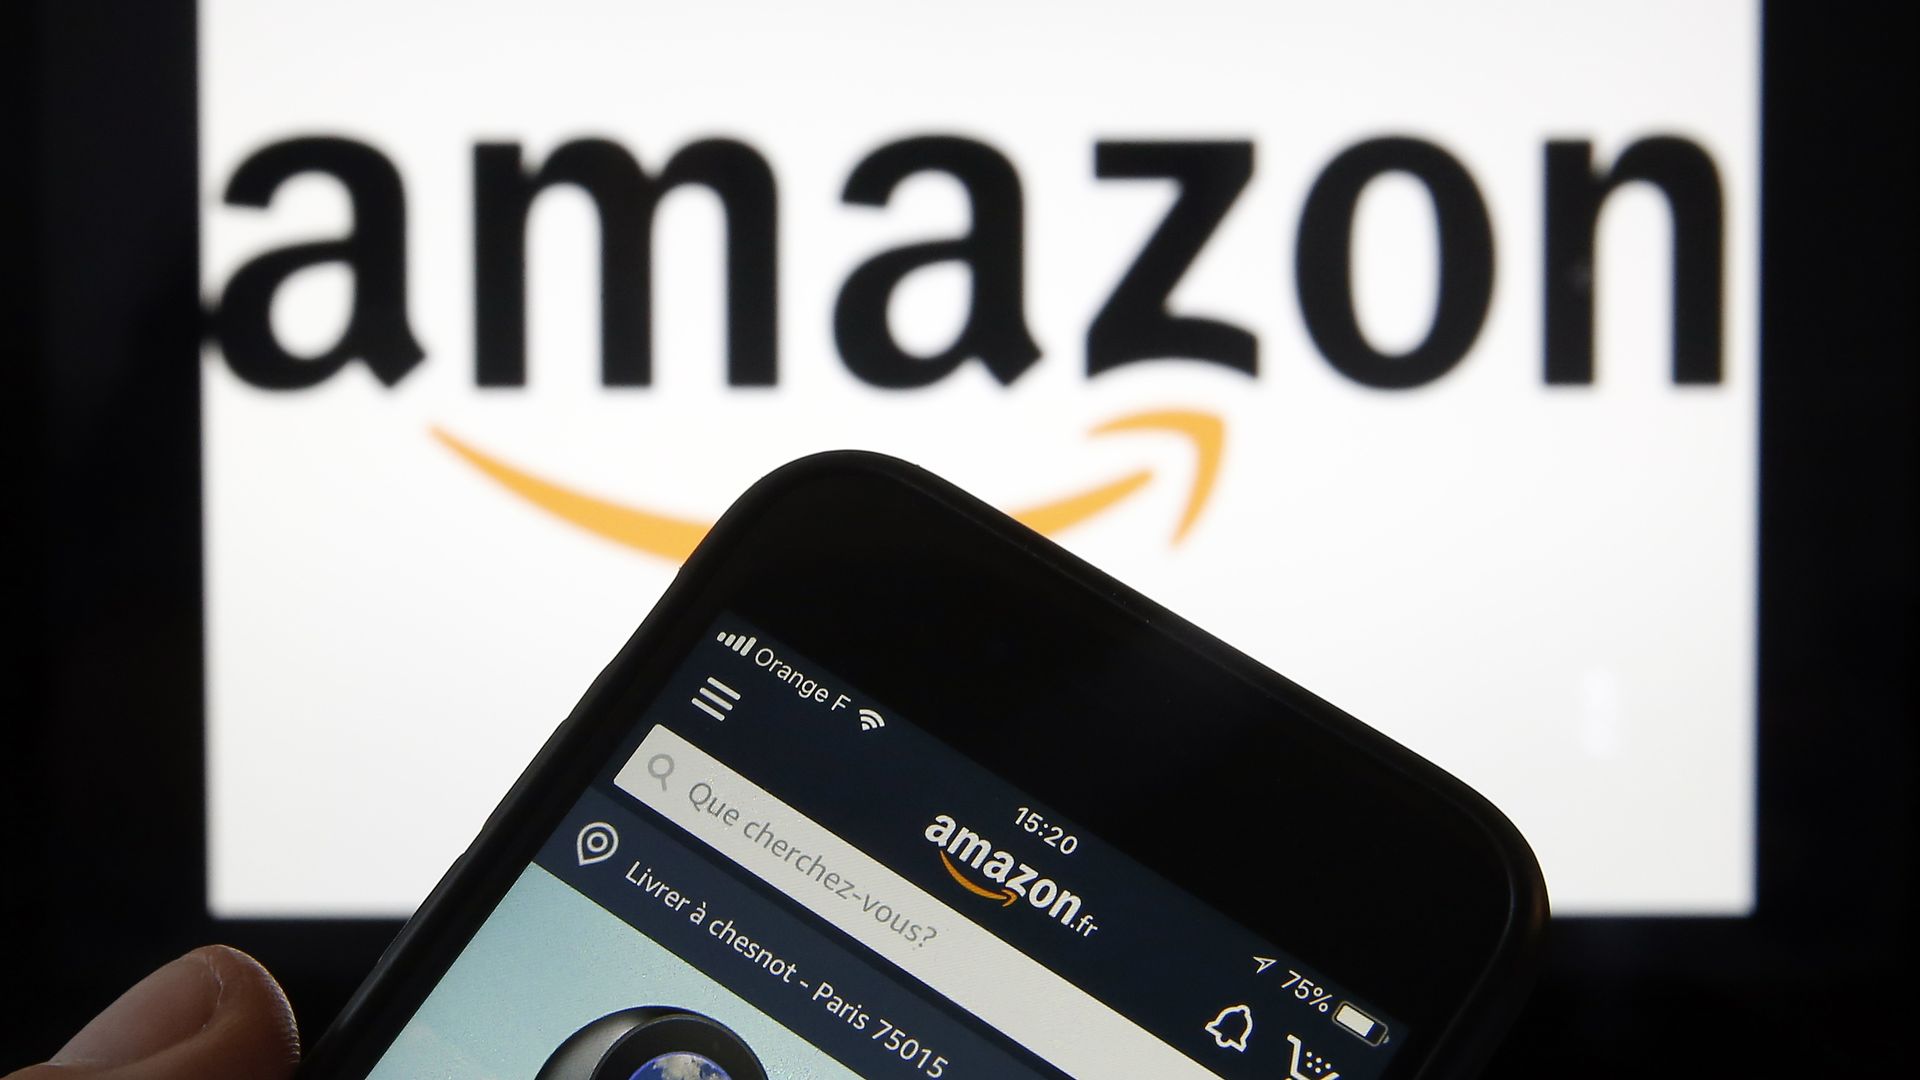 Amazon's logo in the background with the Amazon website on a phone in the foreground.